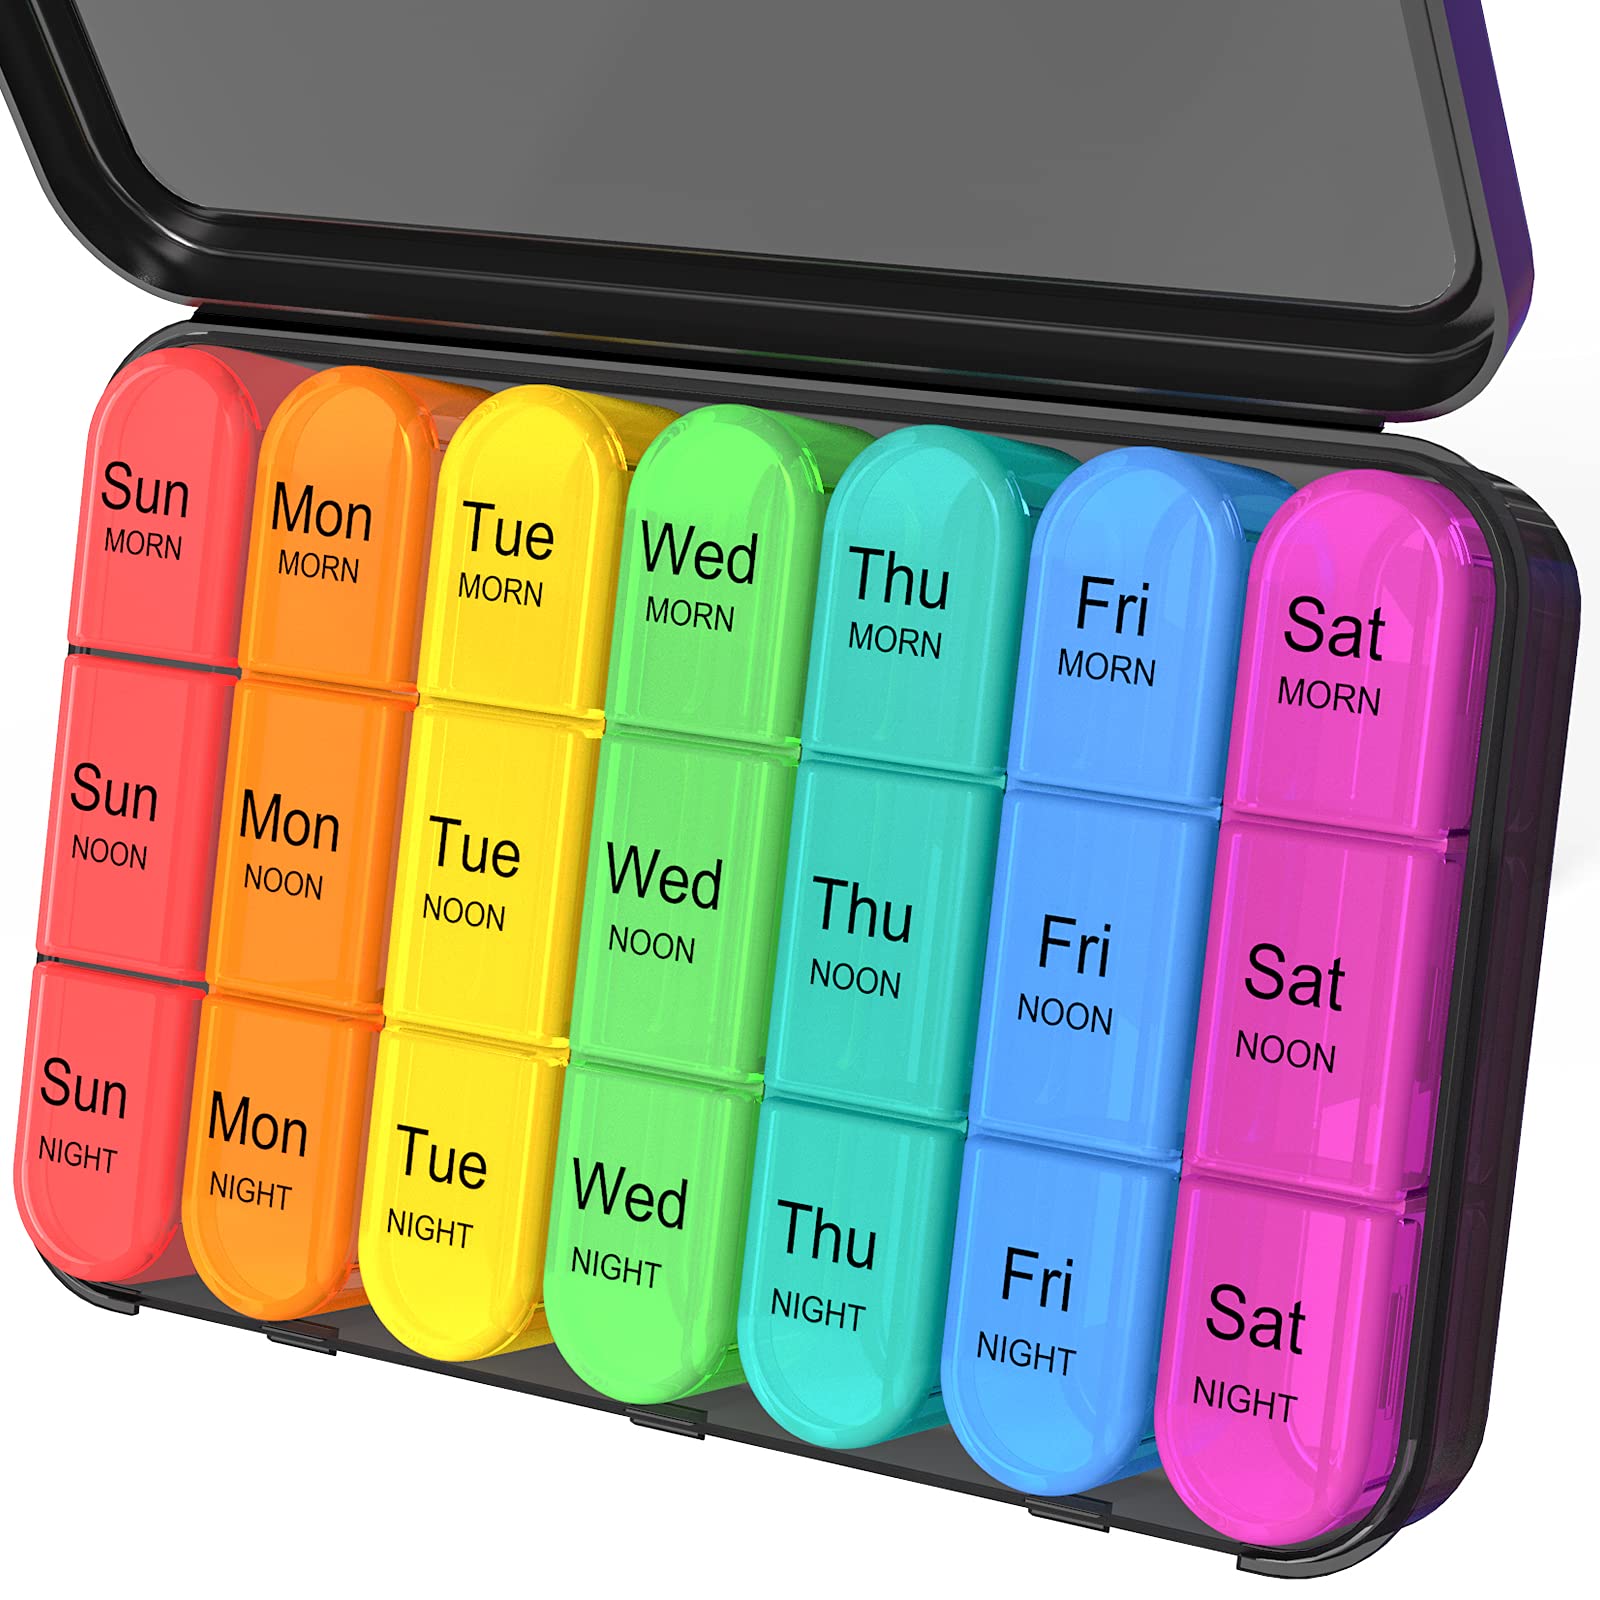 Daviky Pill Organizer 3 Times a Day, Weekly Pill Organizer 3 Times a Day, Pill  Box 7 Day, Pill Cases Organizers 7 Day, Daily Pill Box Organizer, Medicine  Organizer to Hold Vitamins and Medication